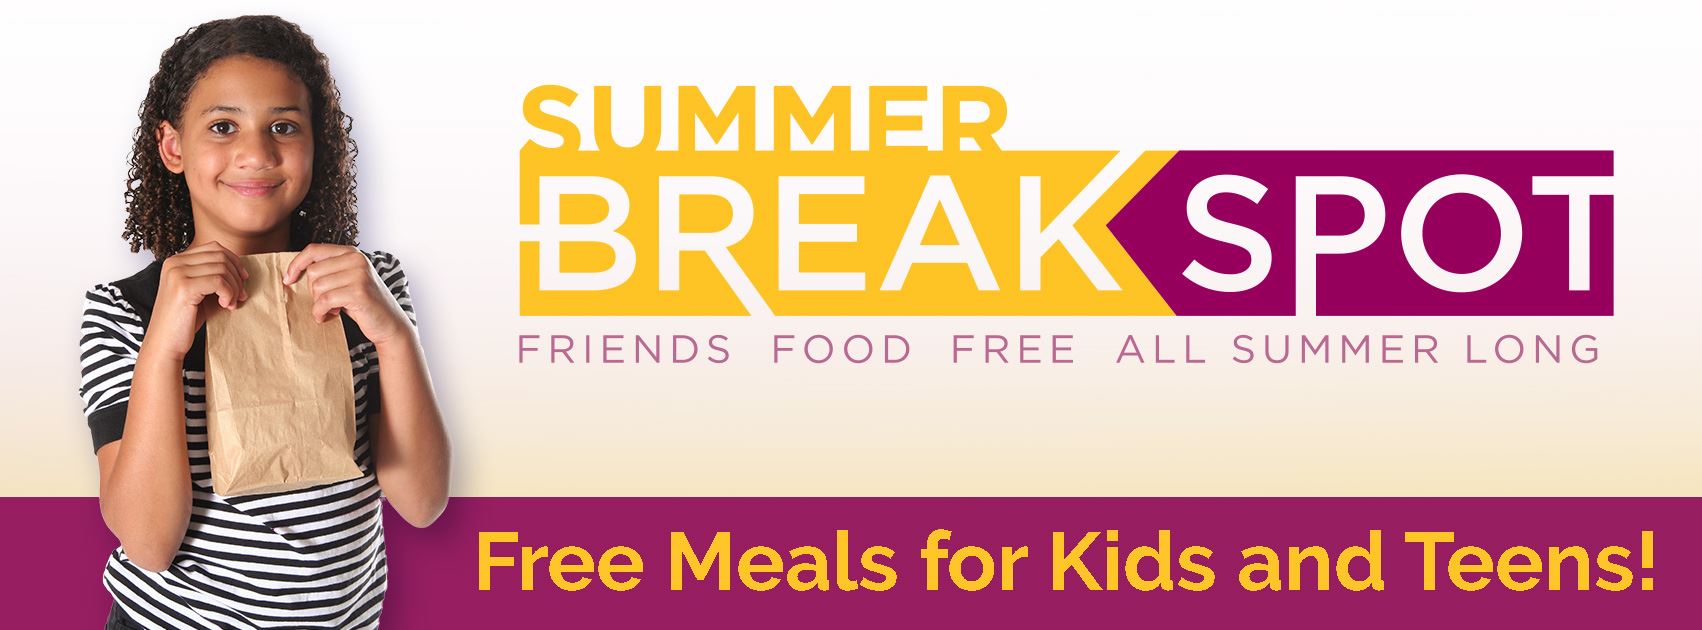 Summer Breakspot - Free Meals for Kids and Teens!